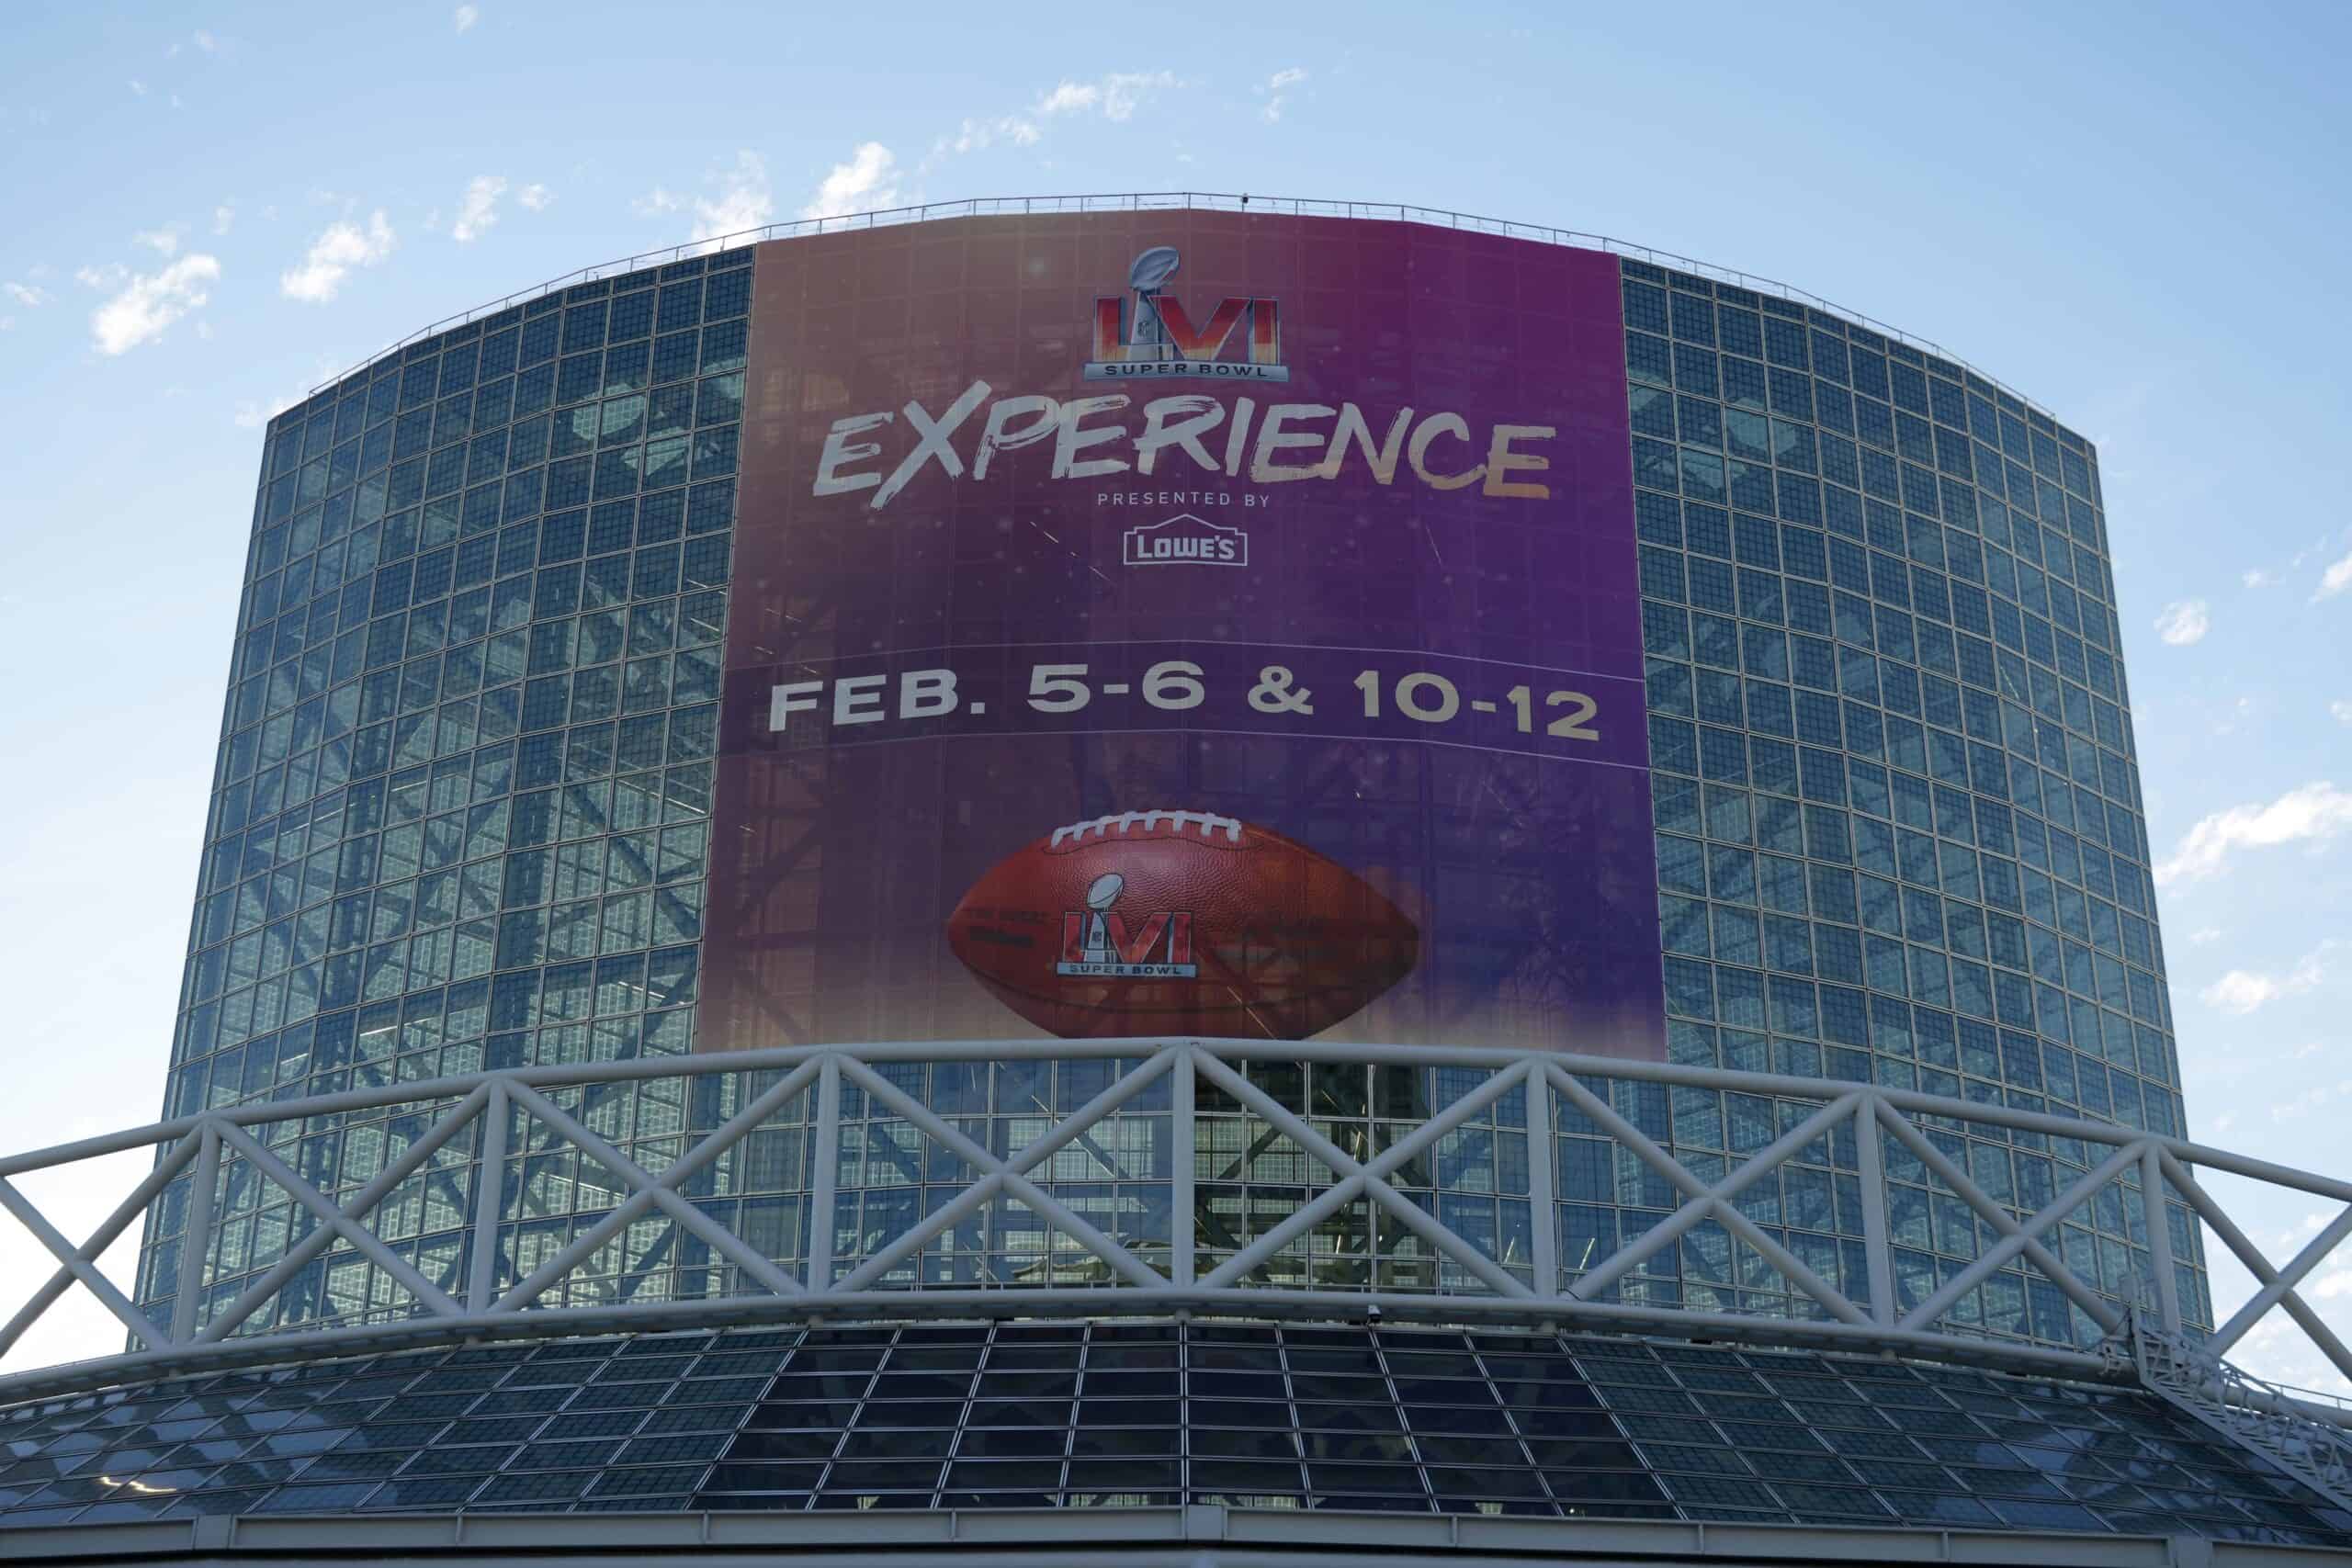 super bowl game day experience